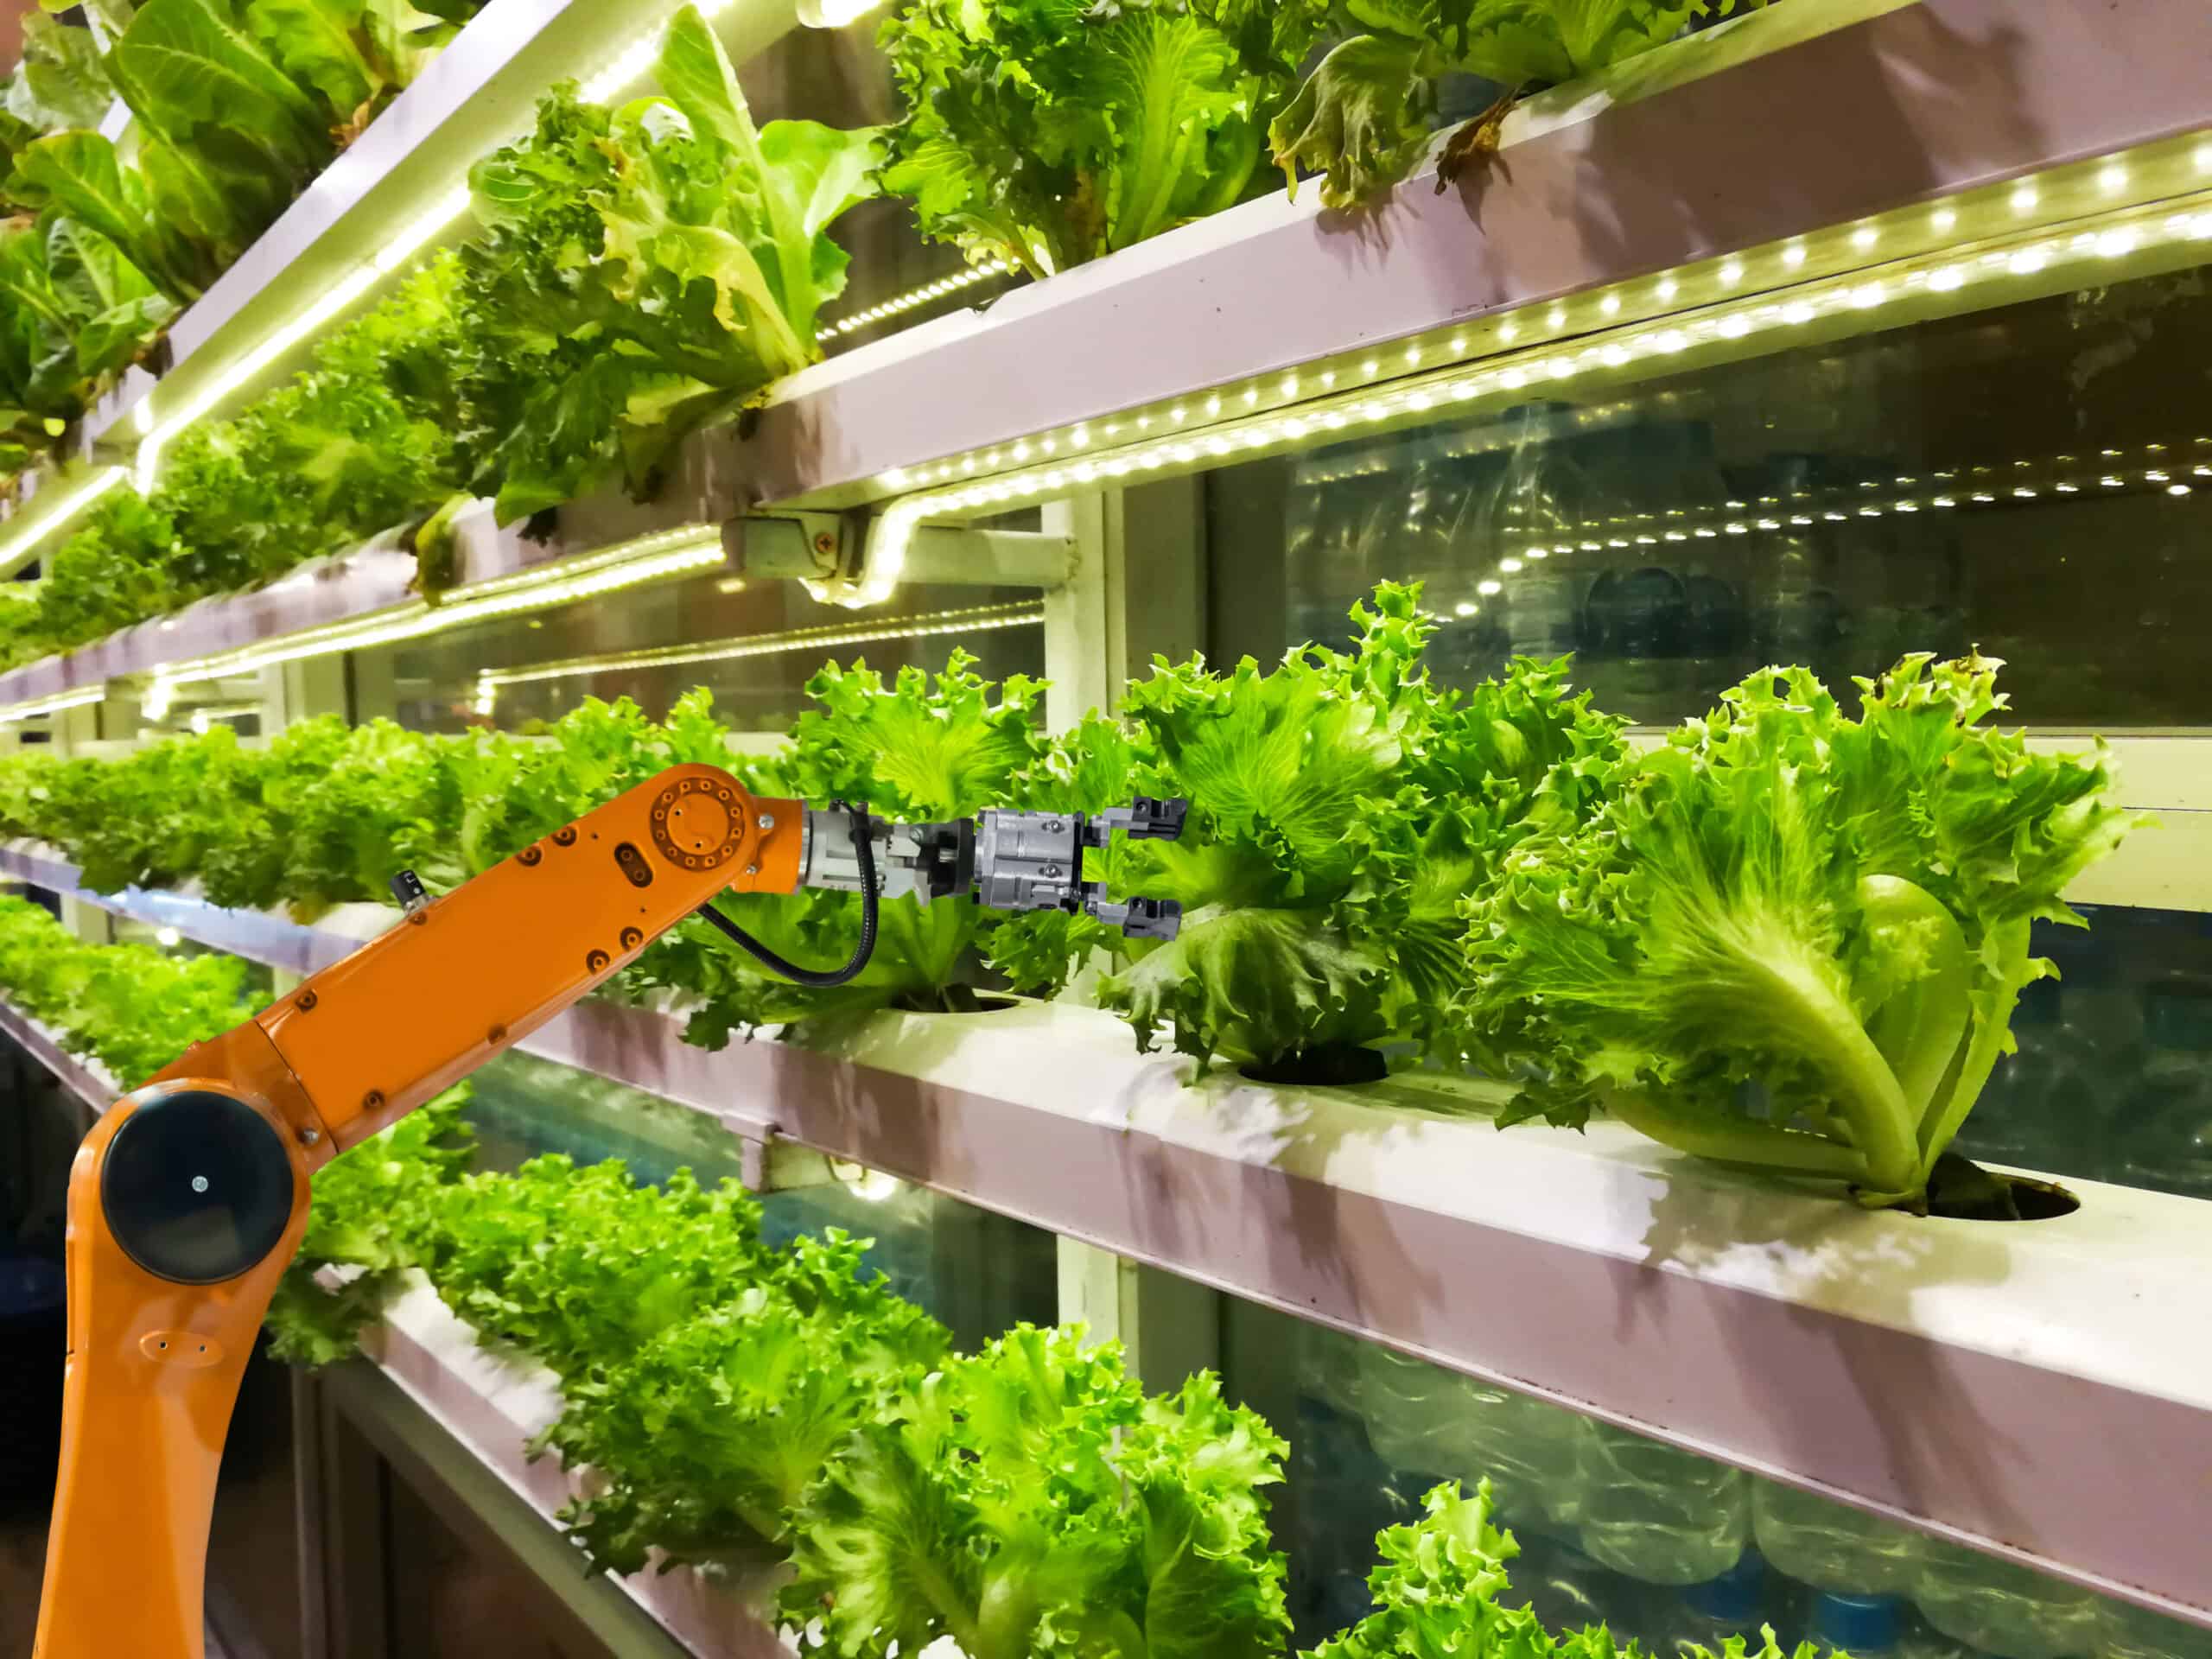 A robot arm extends toward rows of lettuce in a lab.